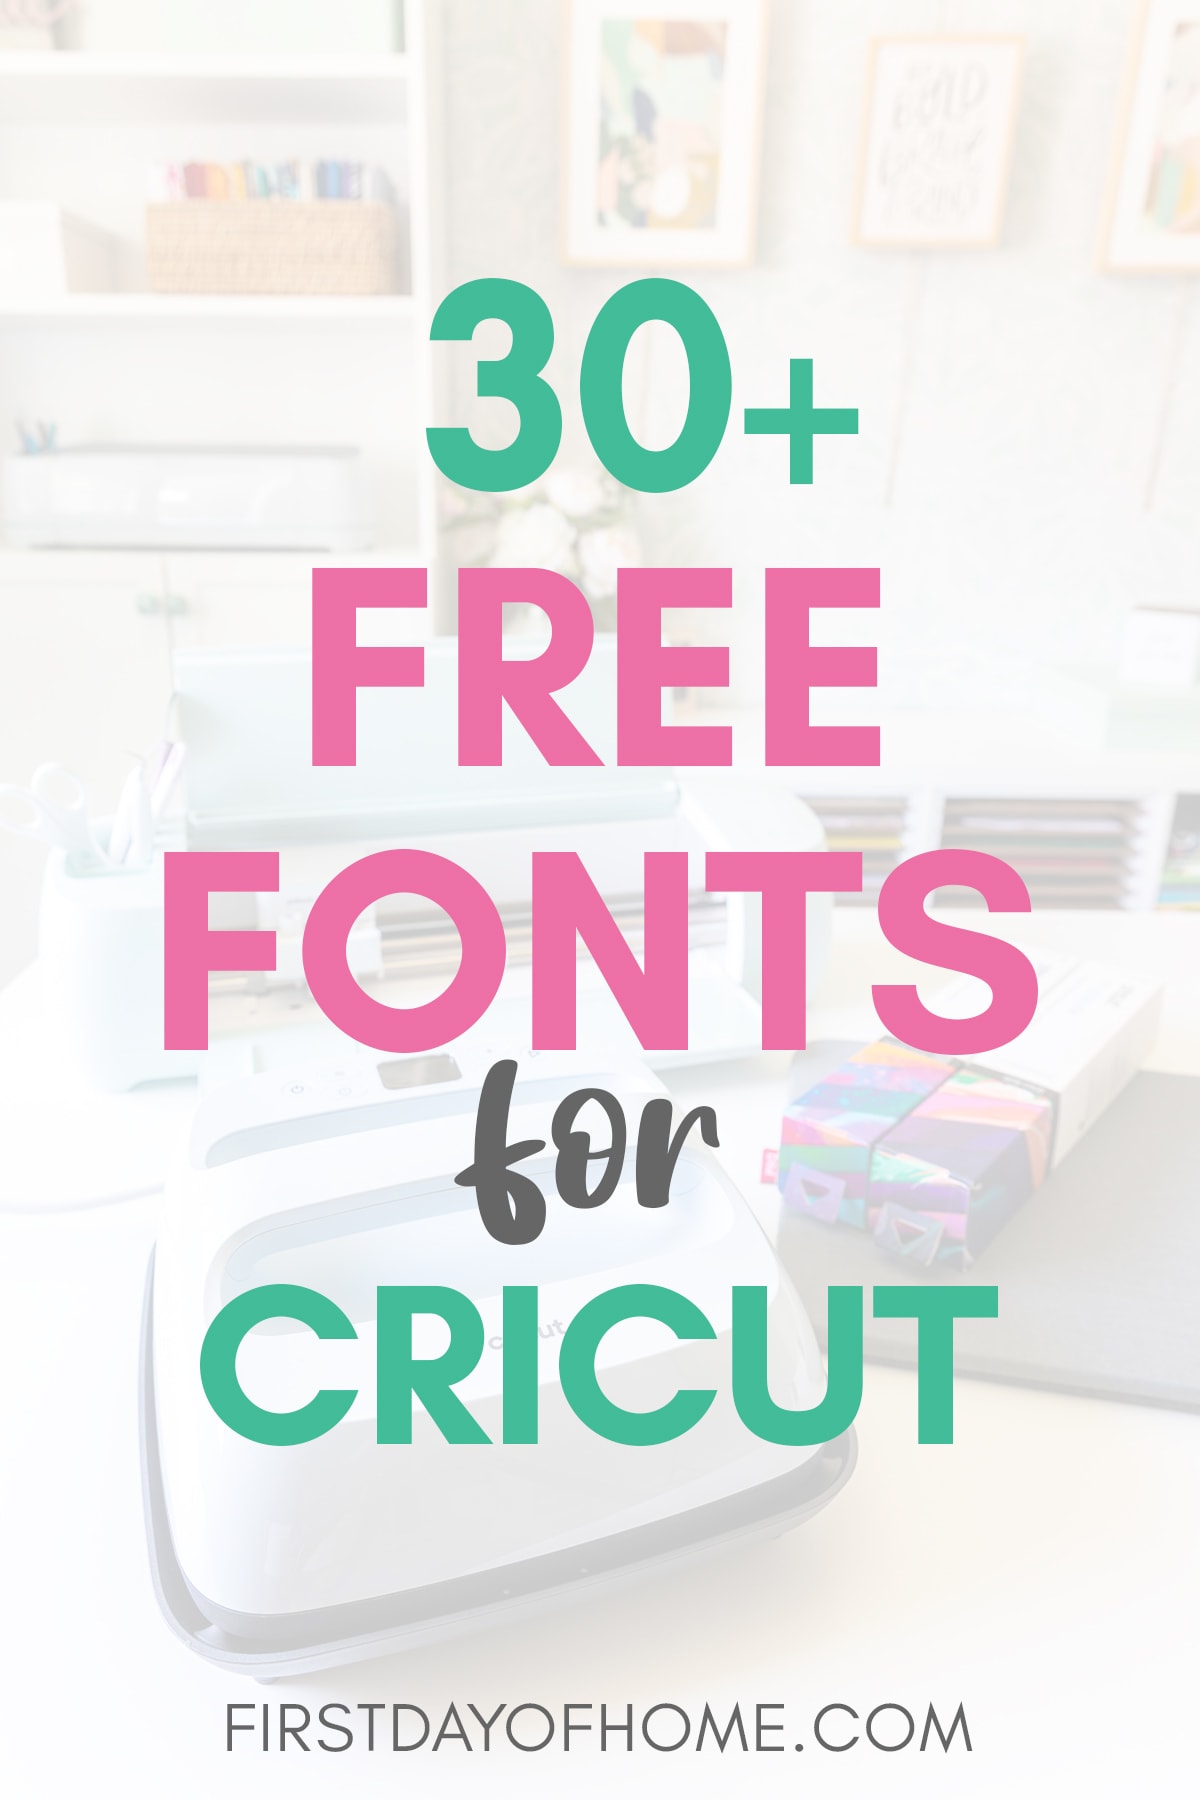 Image of Cricut machines and tools with text overlay that reads "30+ Free Fonts for Cricut".